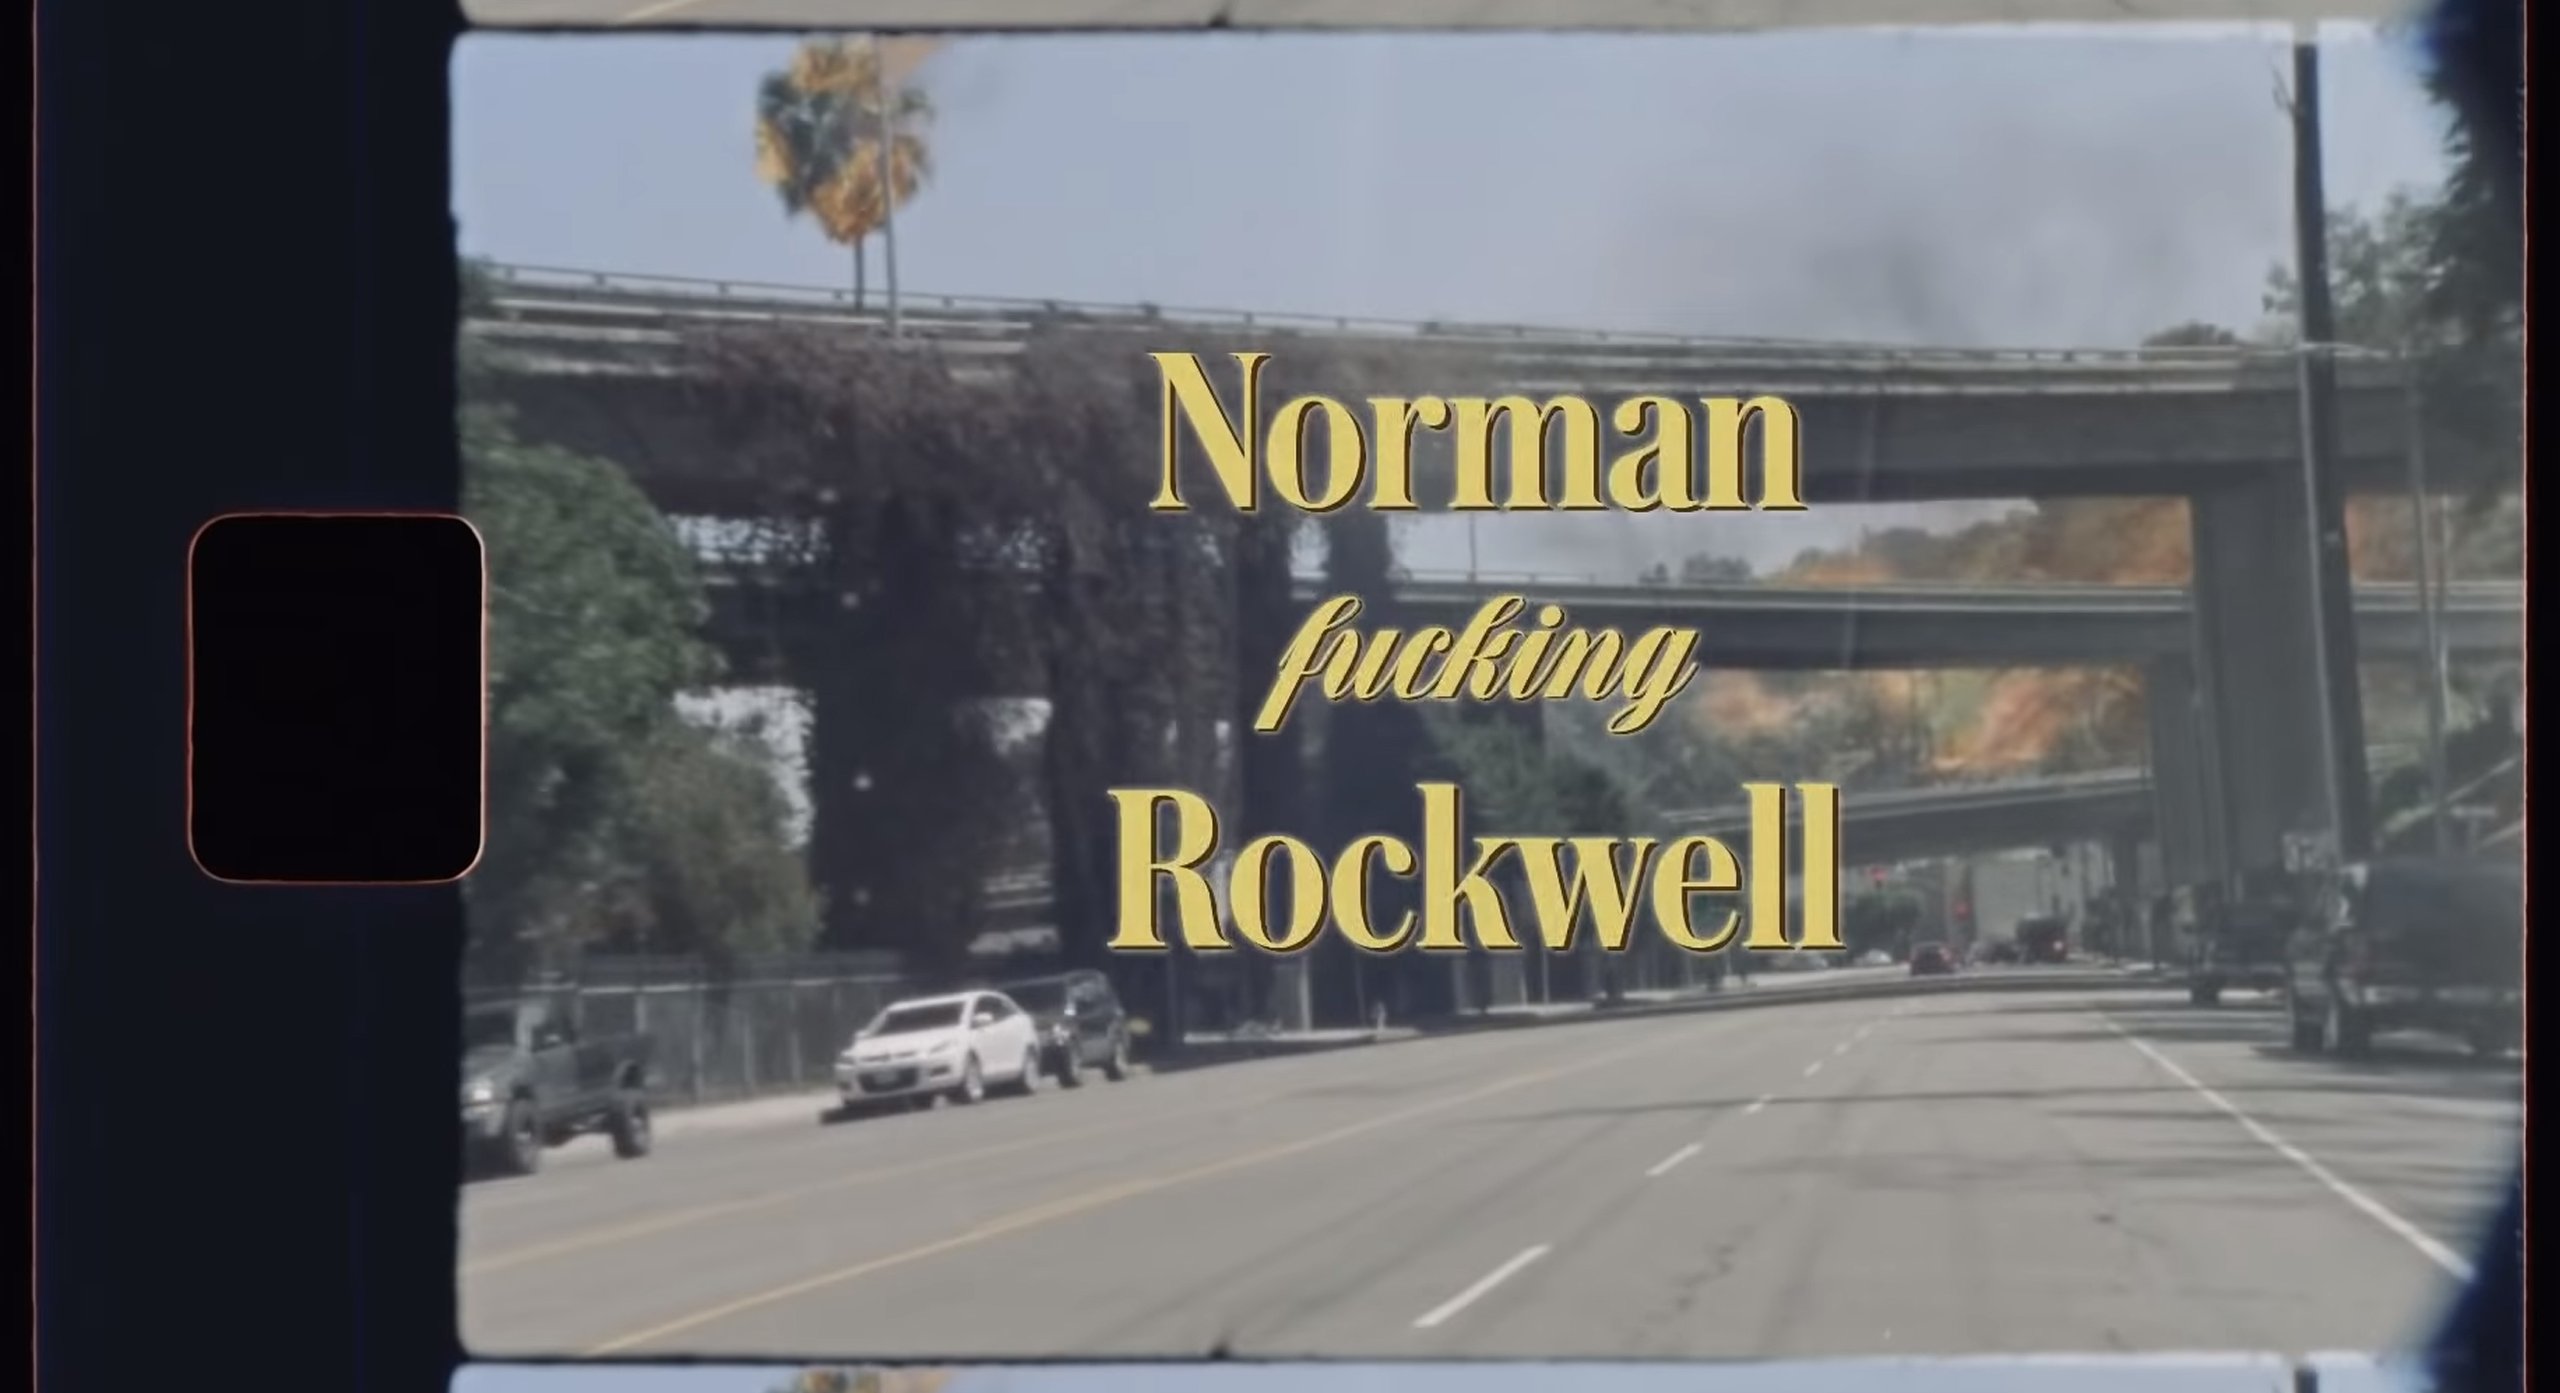 Lana Del Rey lança vídeo triplo para "Norman fucking Rockwell", "Bartender" e "Happiness is a Butterfly"